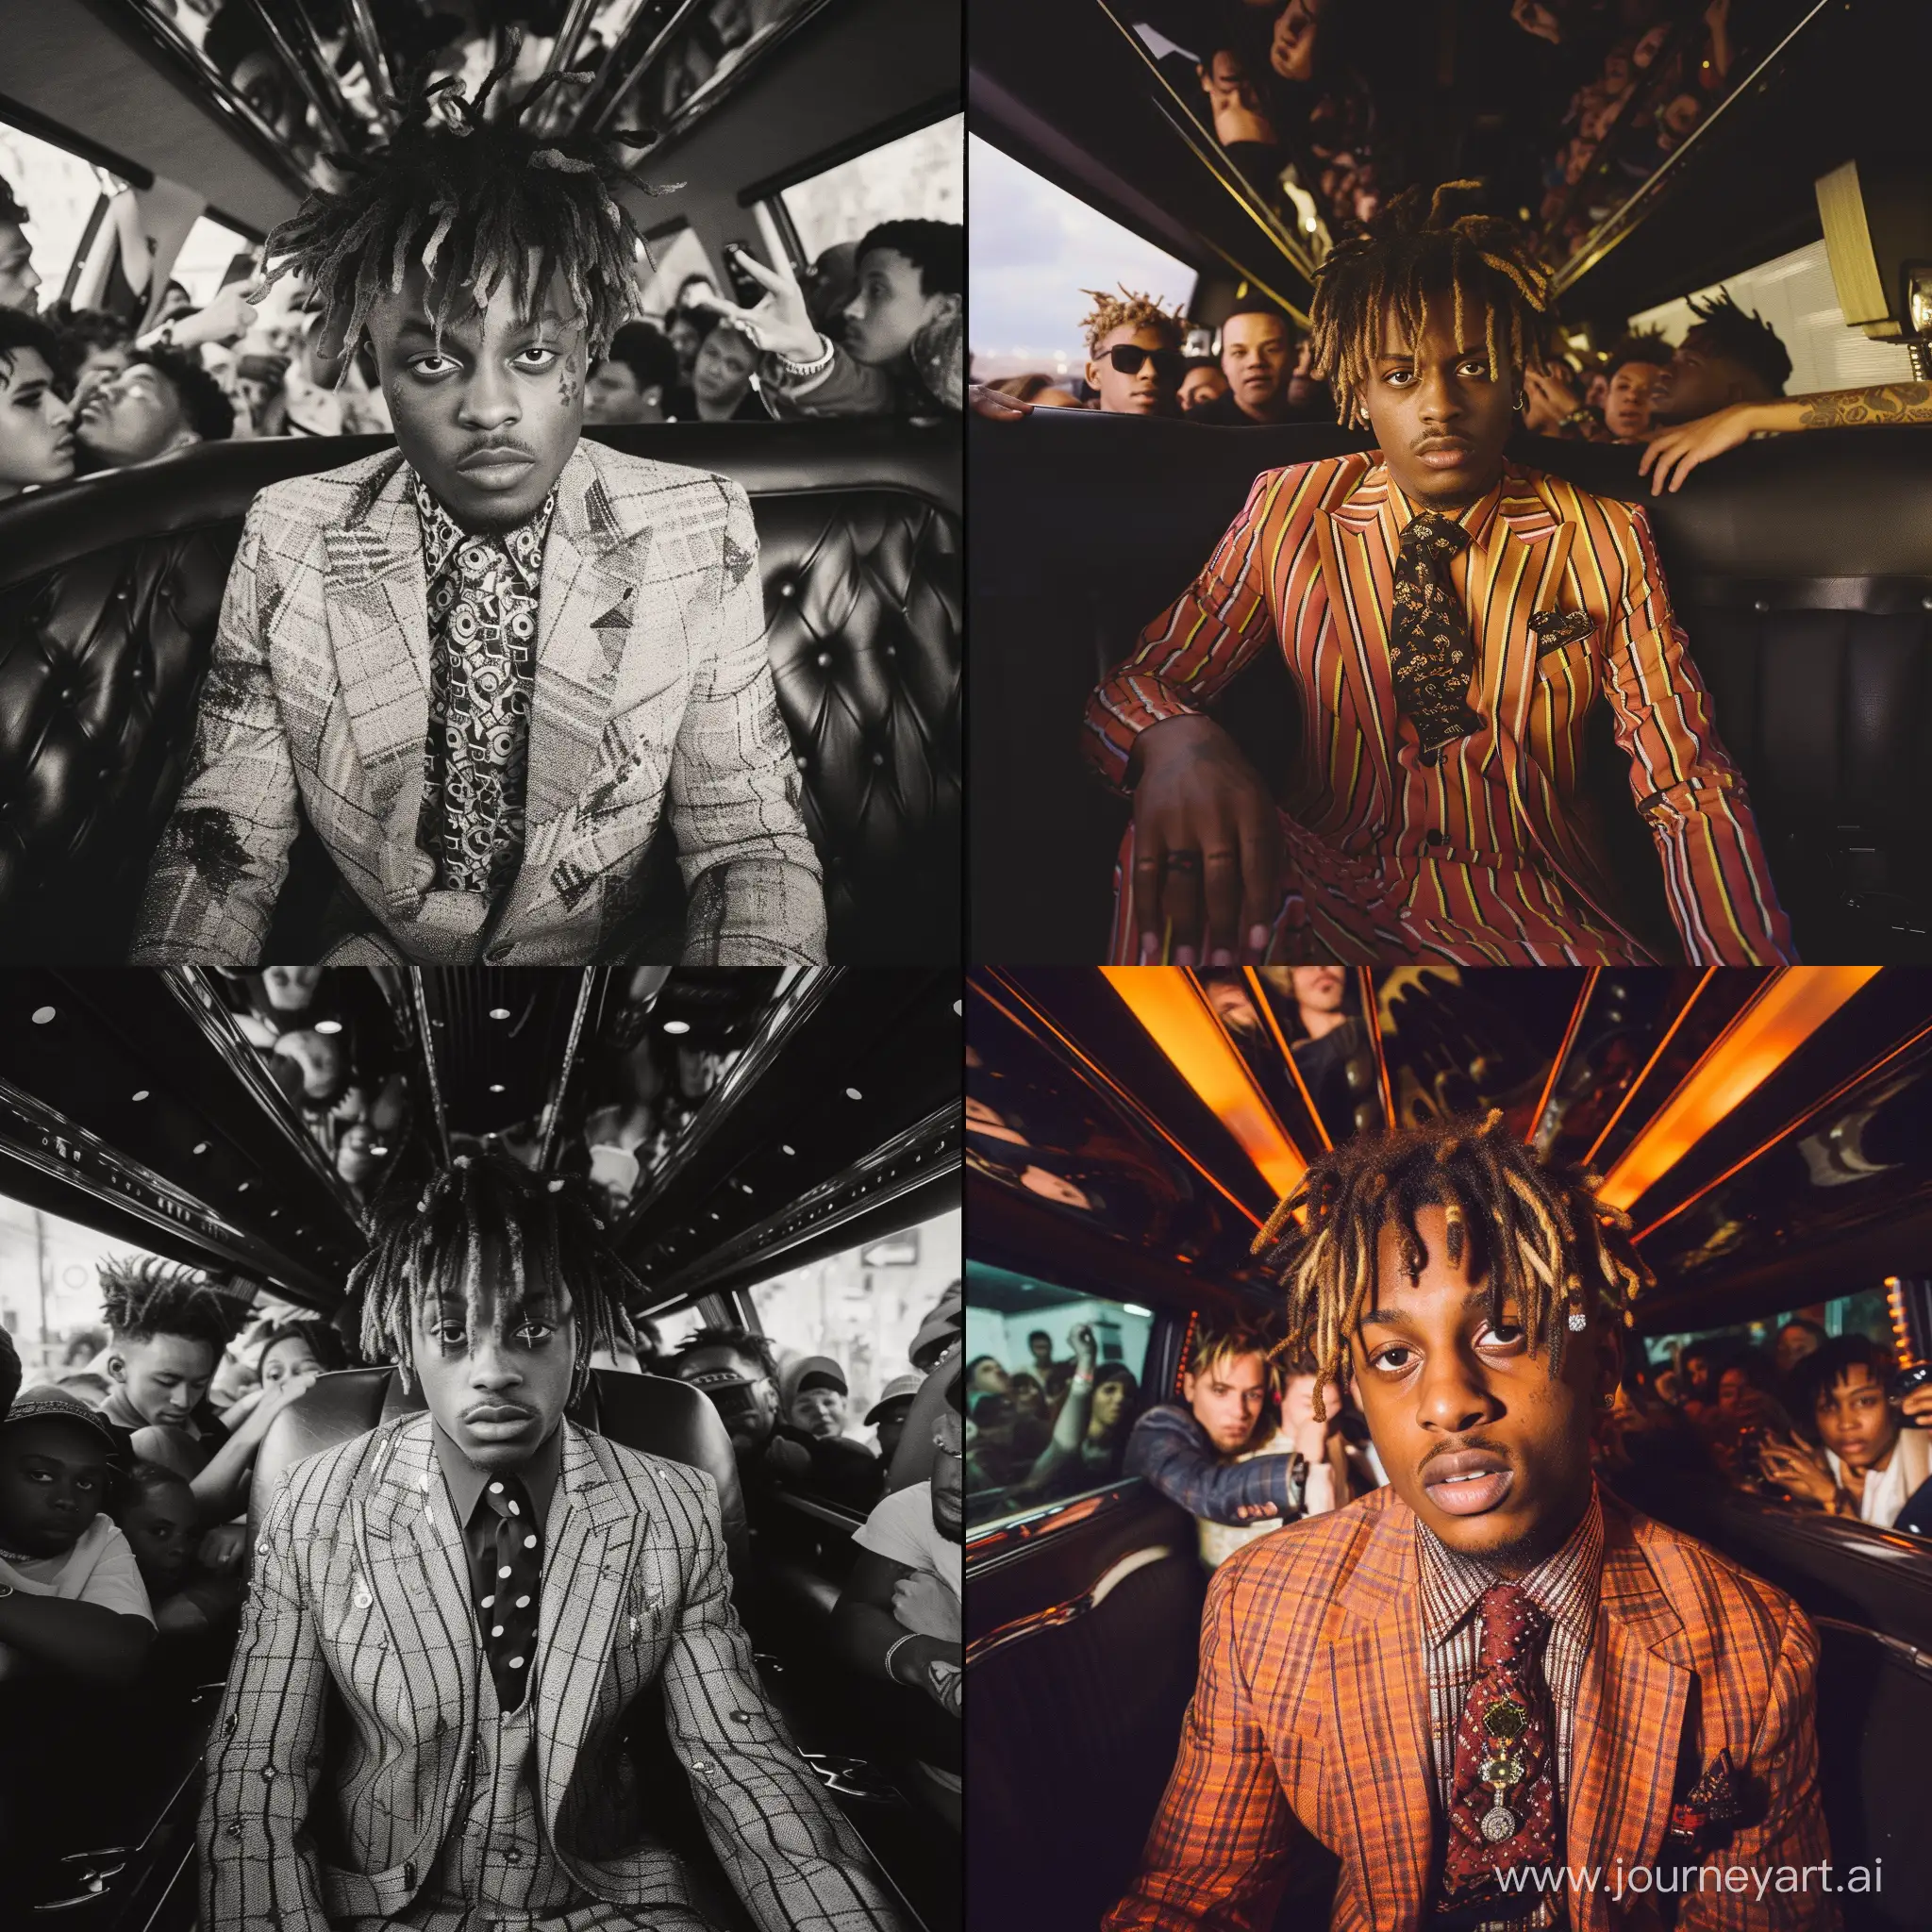 A 1960s Photograph of Juice WRLD wearing a Suit and tie.Inside a Limousine with fans everywhere.